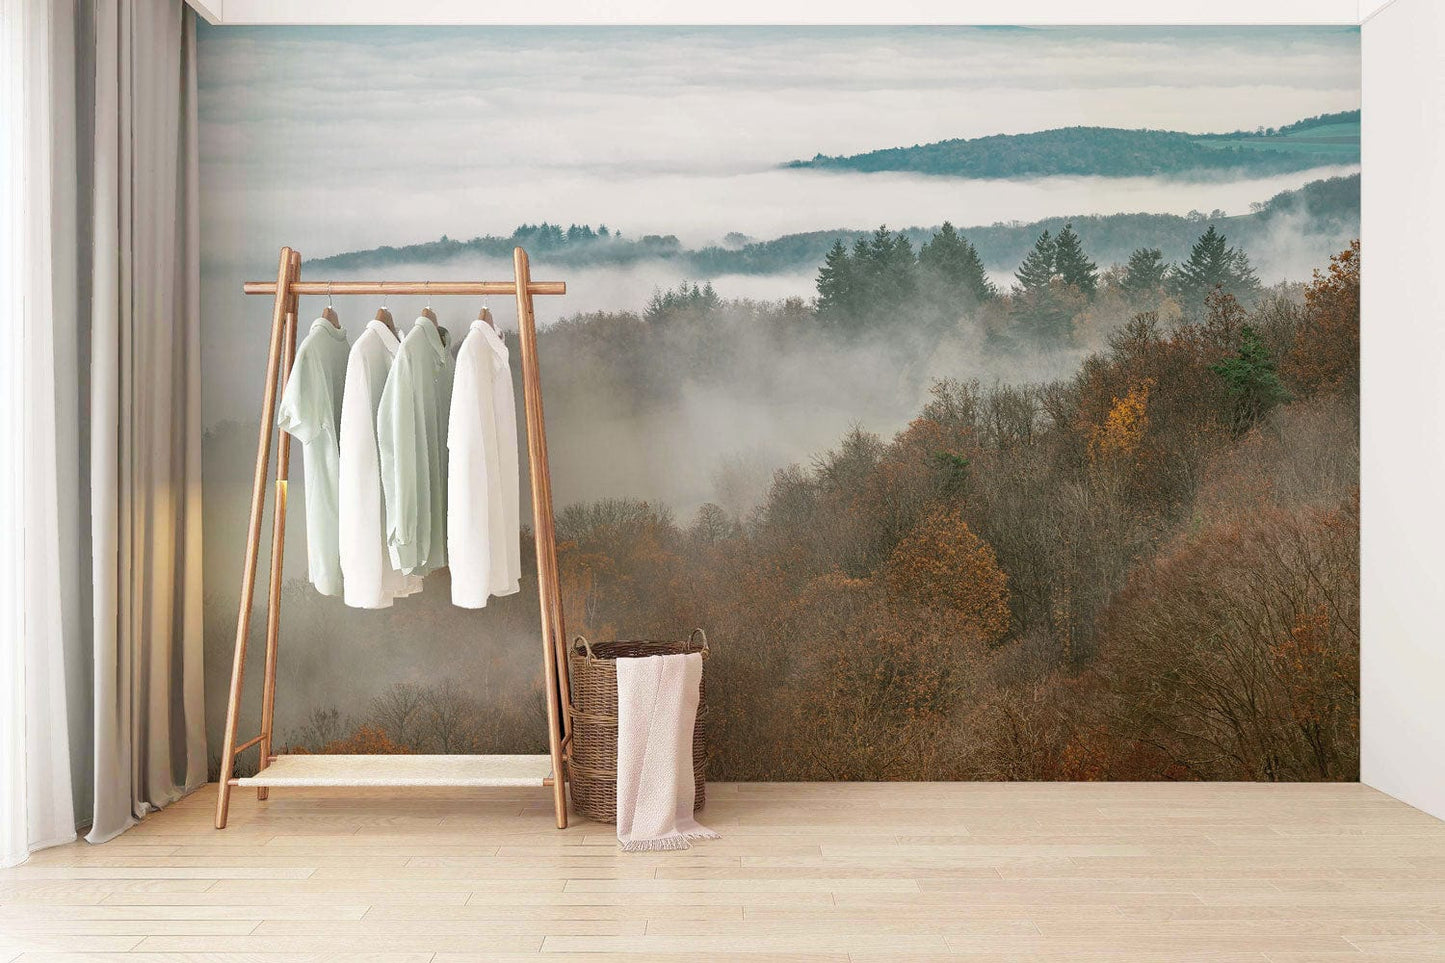 Wallcovering Mural of Mountain Tops, Clouds, and the Sea Used for Hallway Decorations